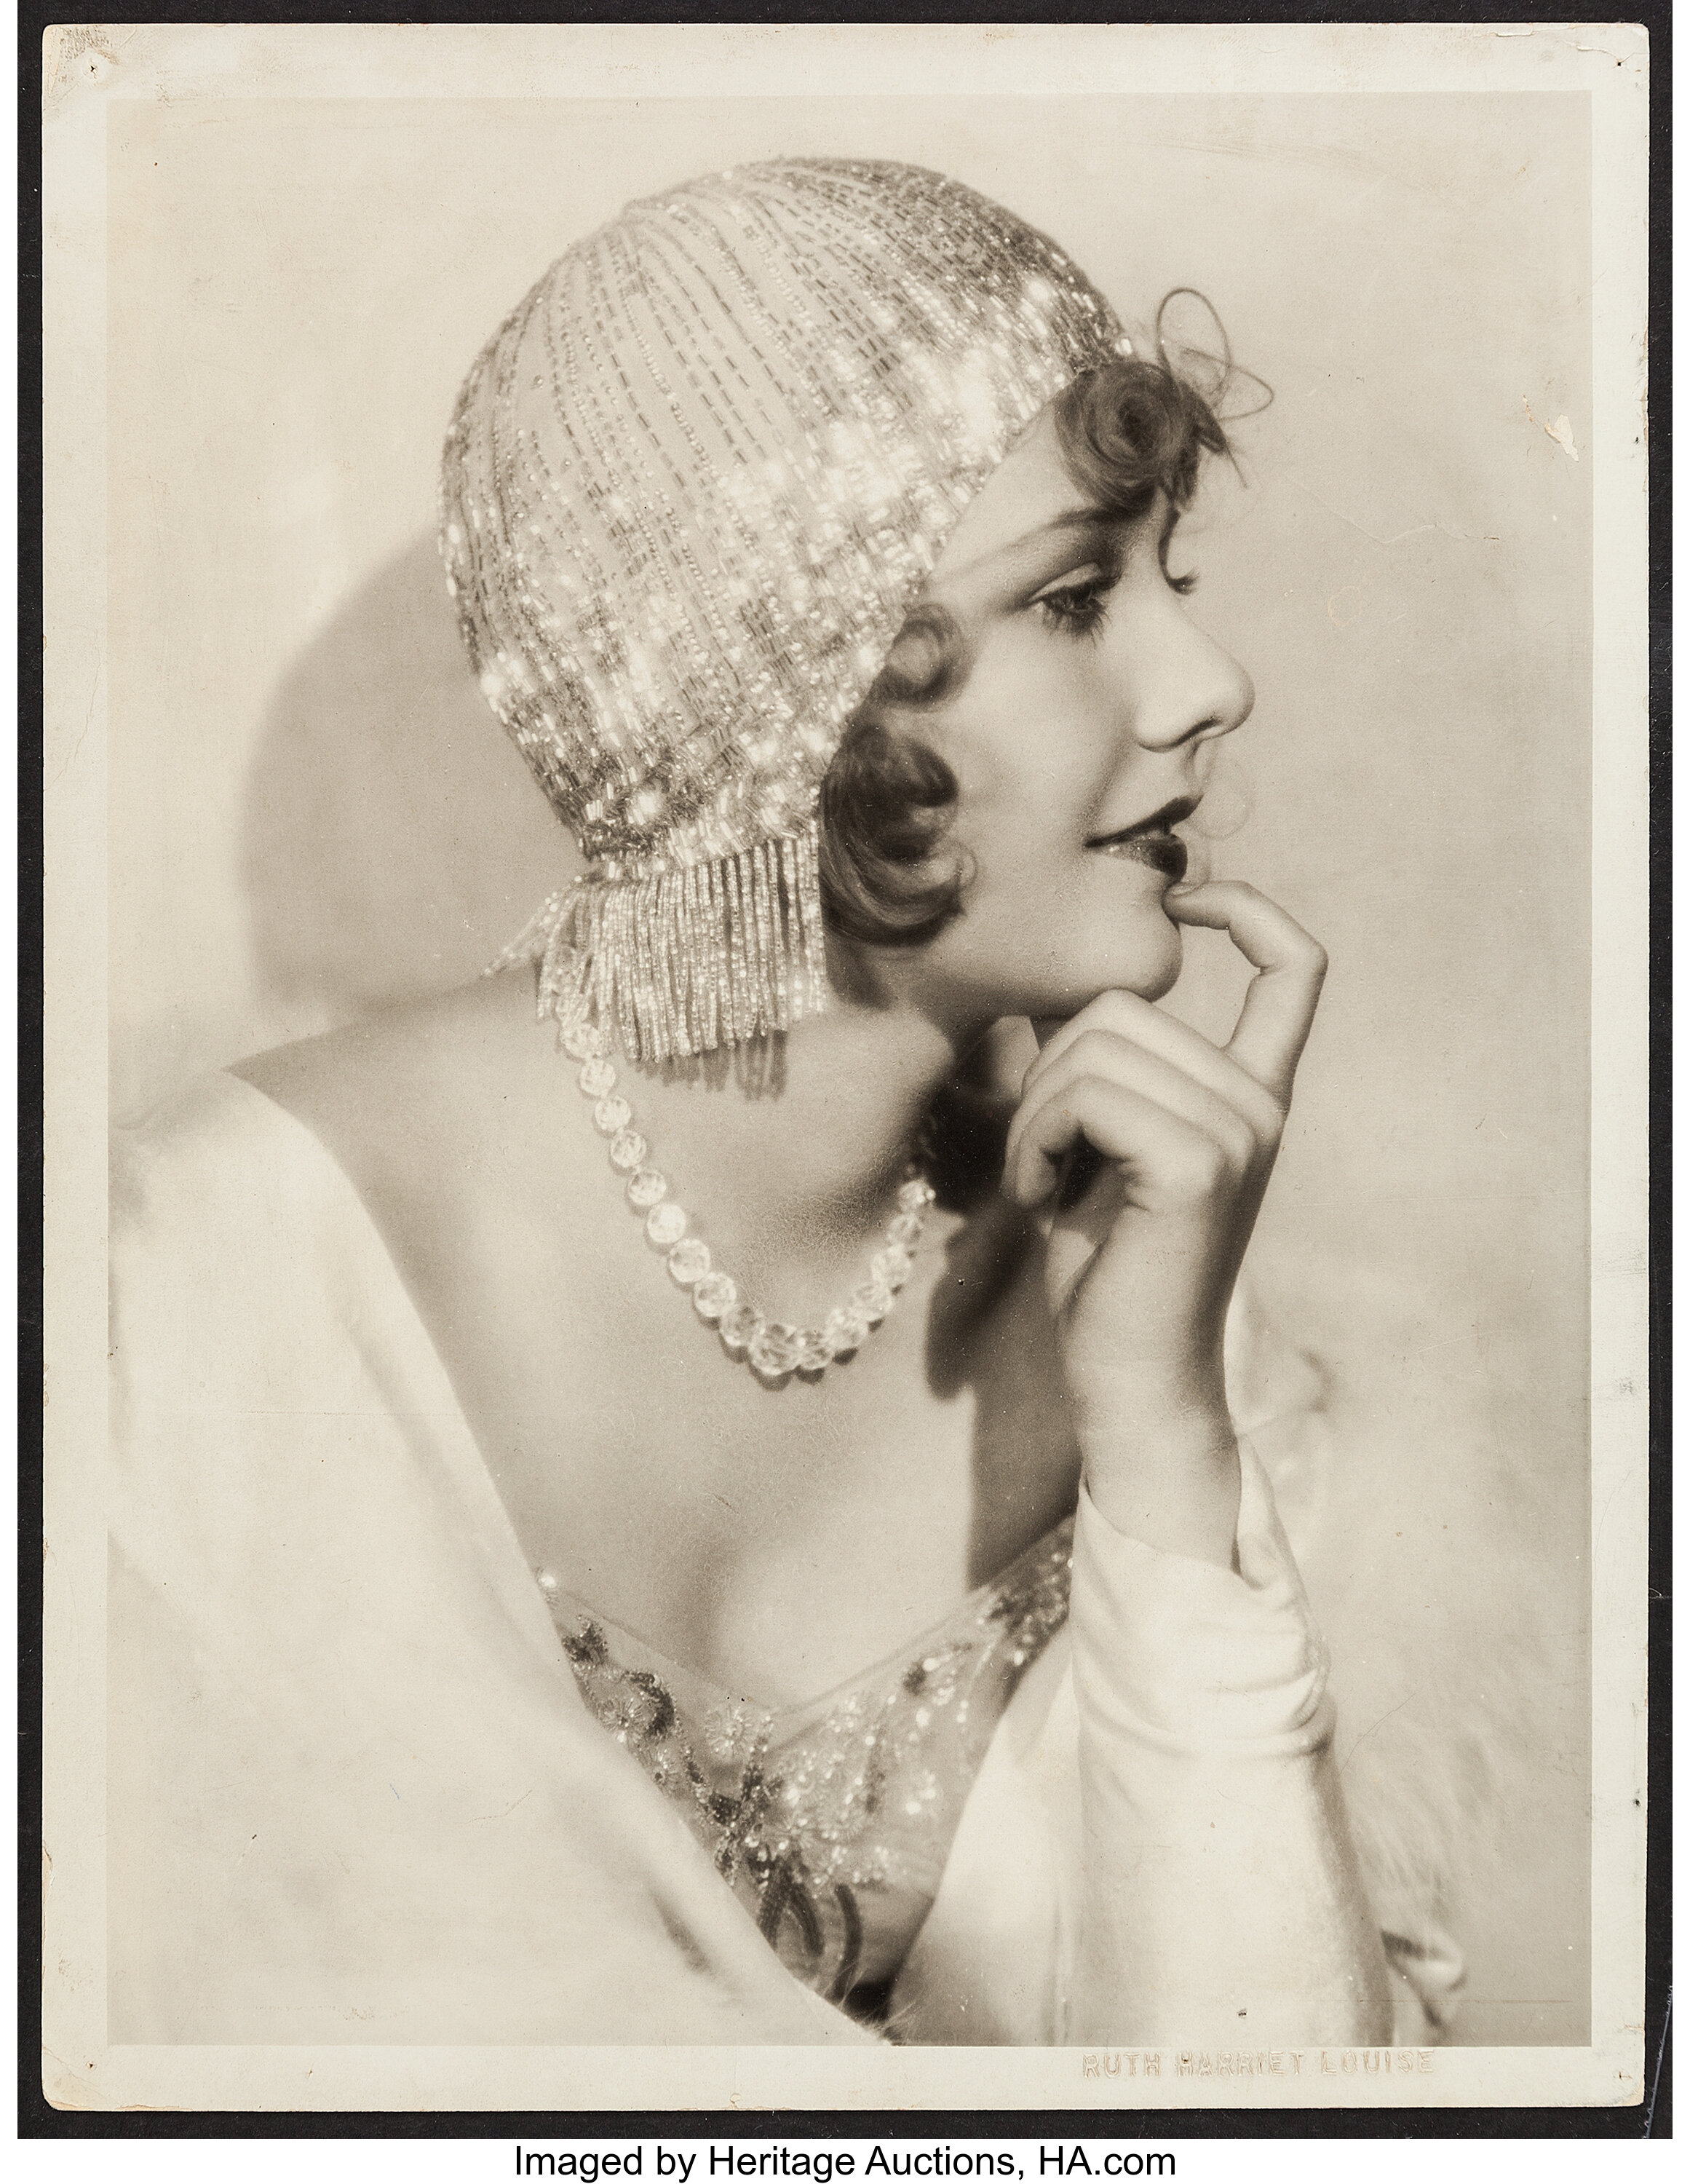 Anita Page By Ruth Harriet Louise Mgm 19s Portrait Photo 10 Lot Heritage Auctions